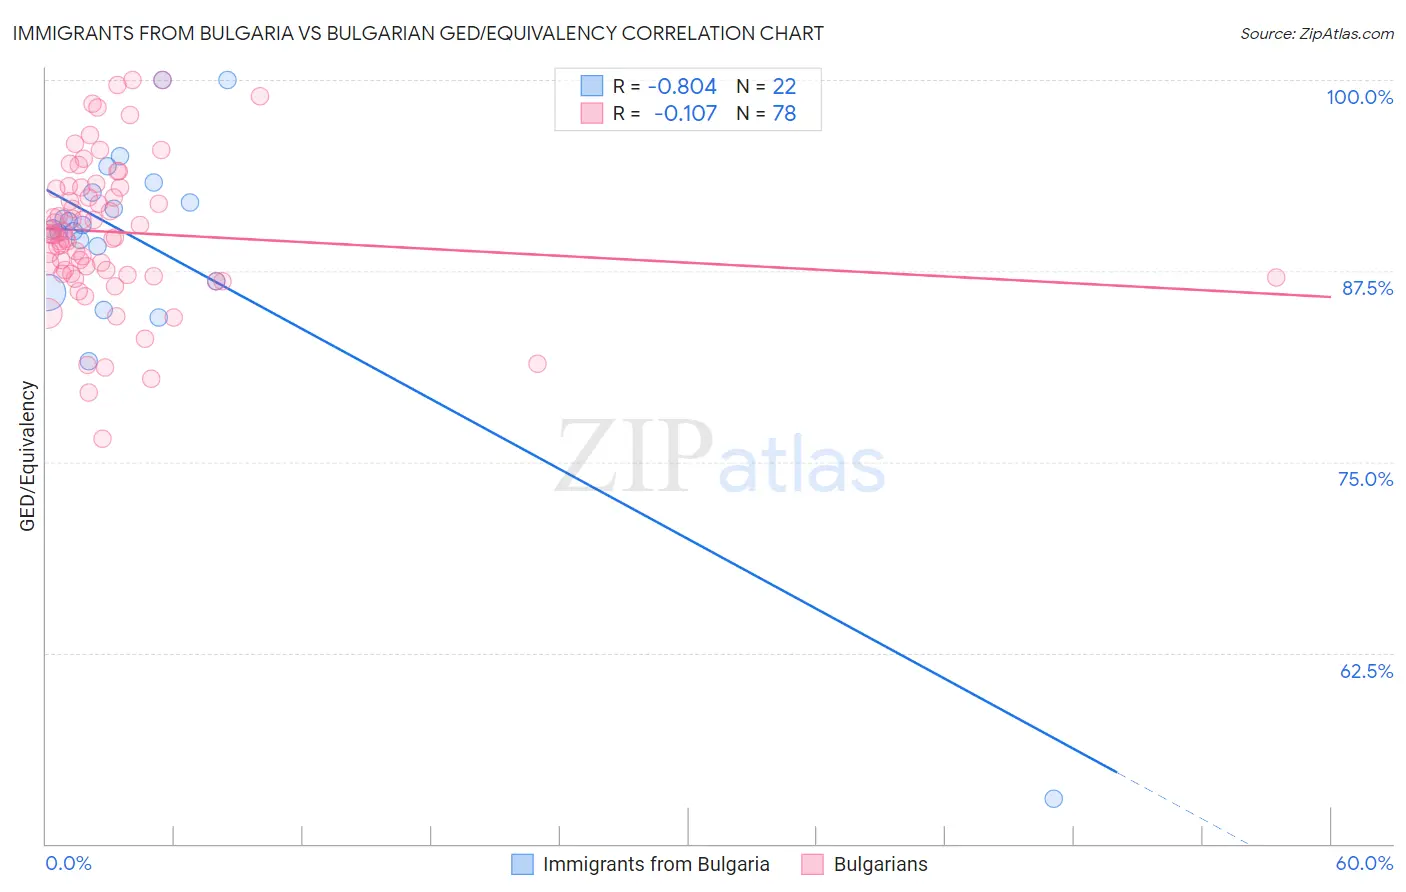 Immigrants from Bulgaria vs Bulgarian GED/Equivalency